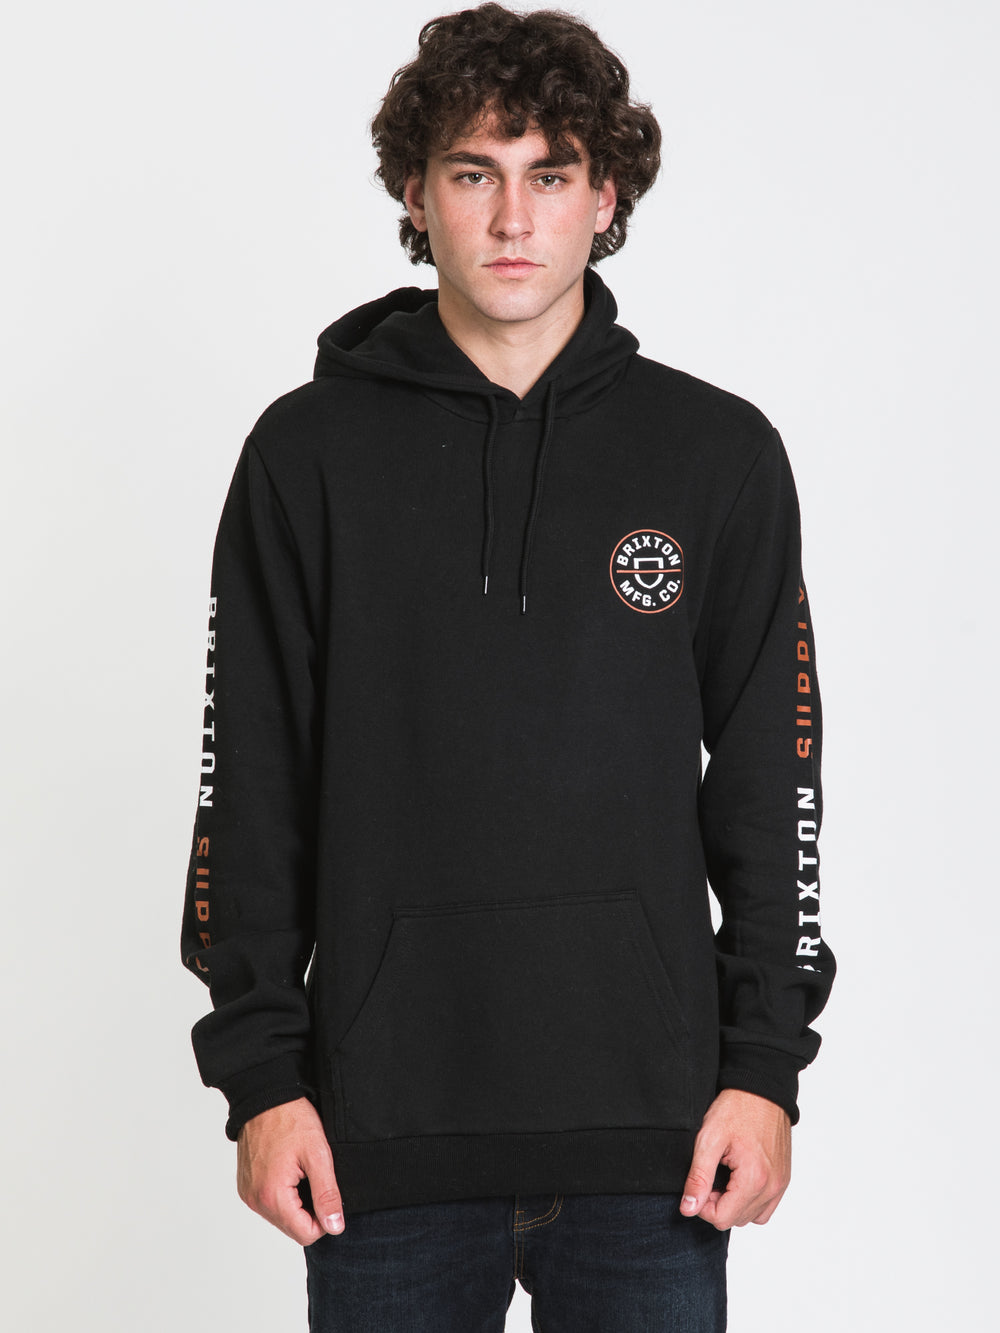 BRIXTON CREST HOODIE  - CLEARANCE